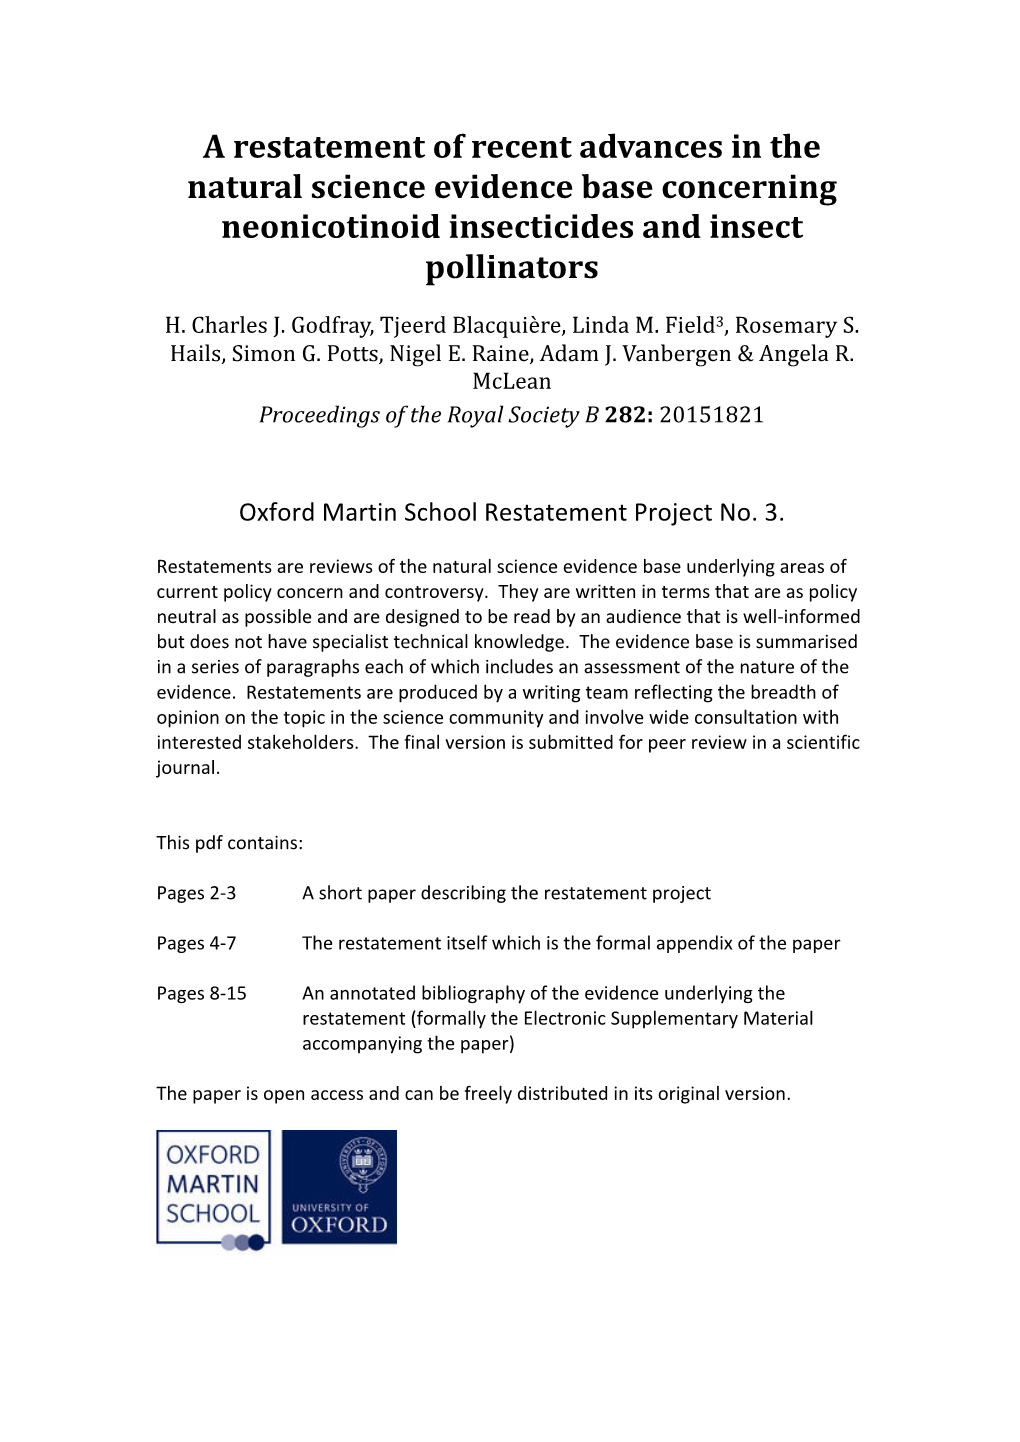 A Restatement of Recent Advances in the Natural Science Evidence Base Concerning Neonicotinoid Insecticides and Insect Pollinators